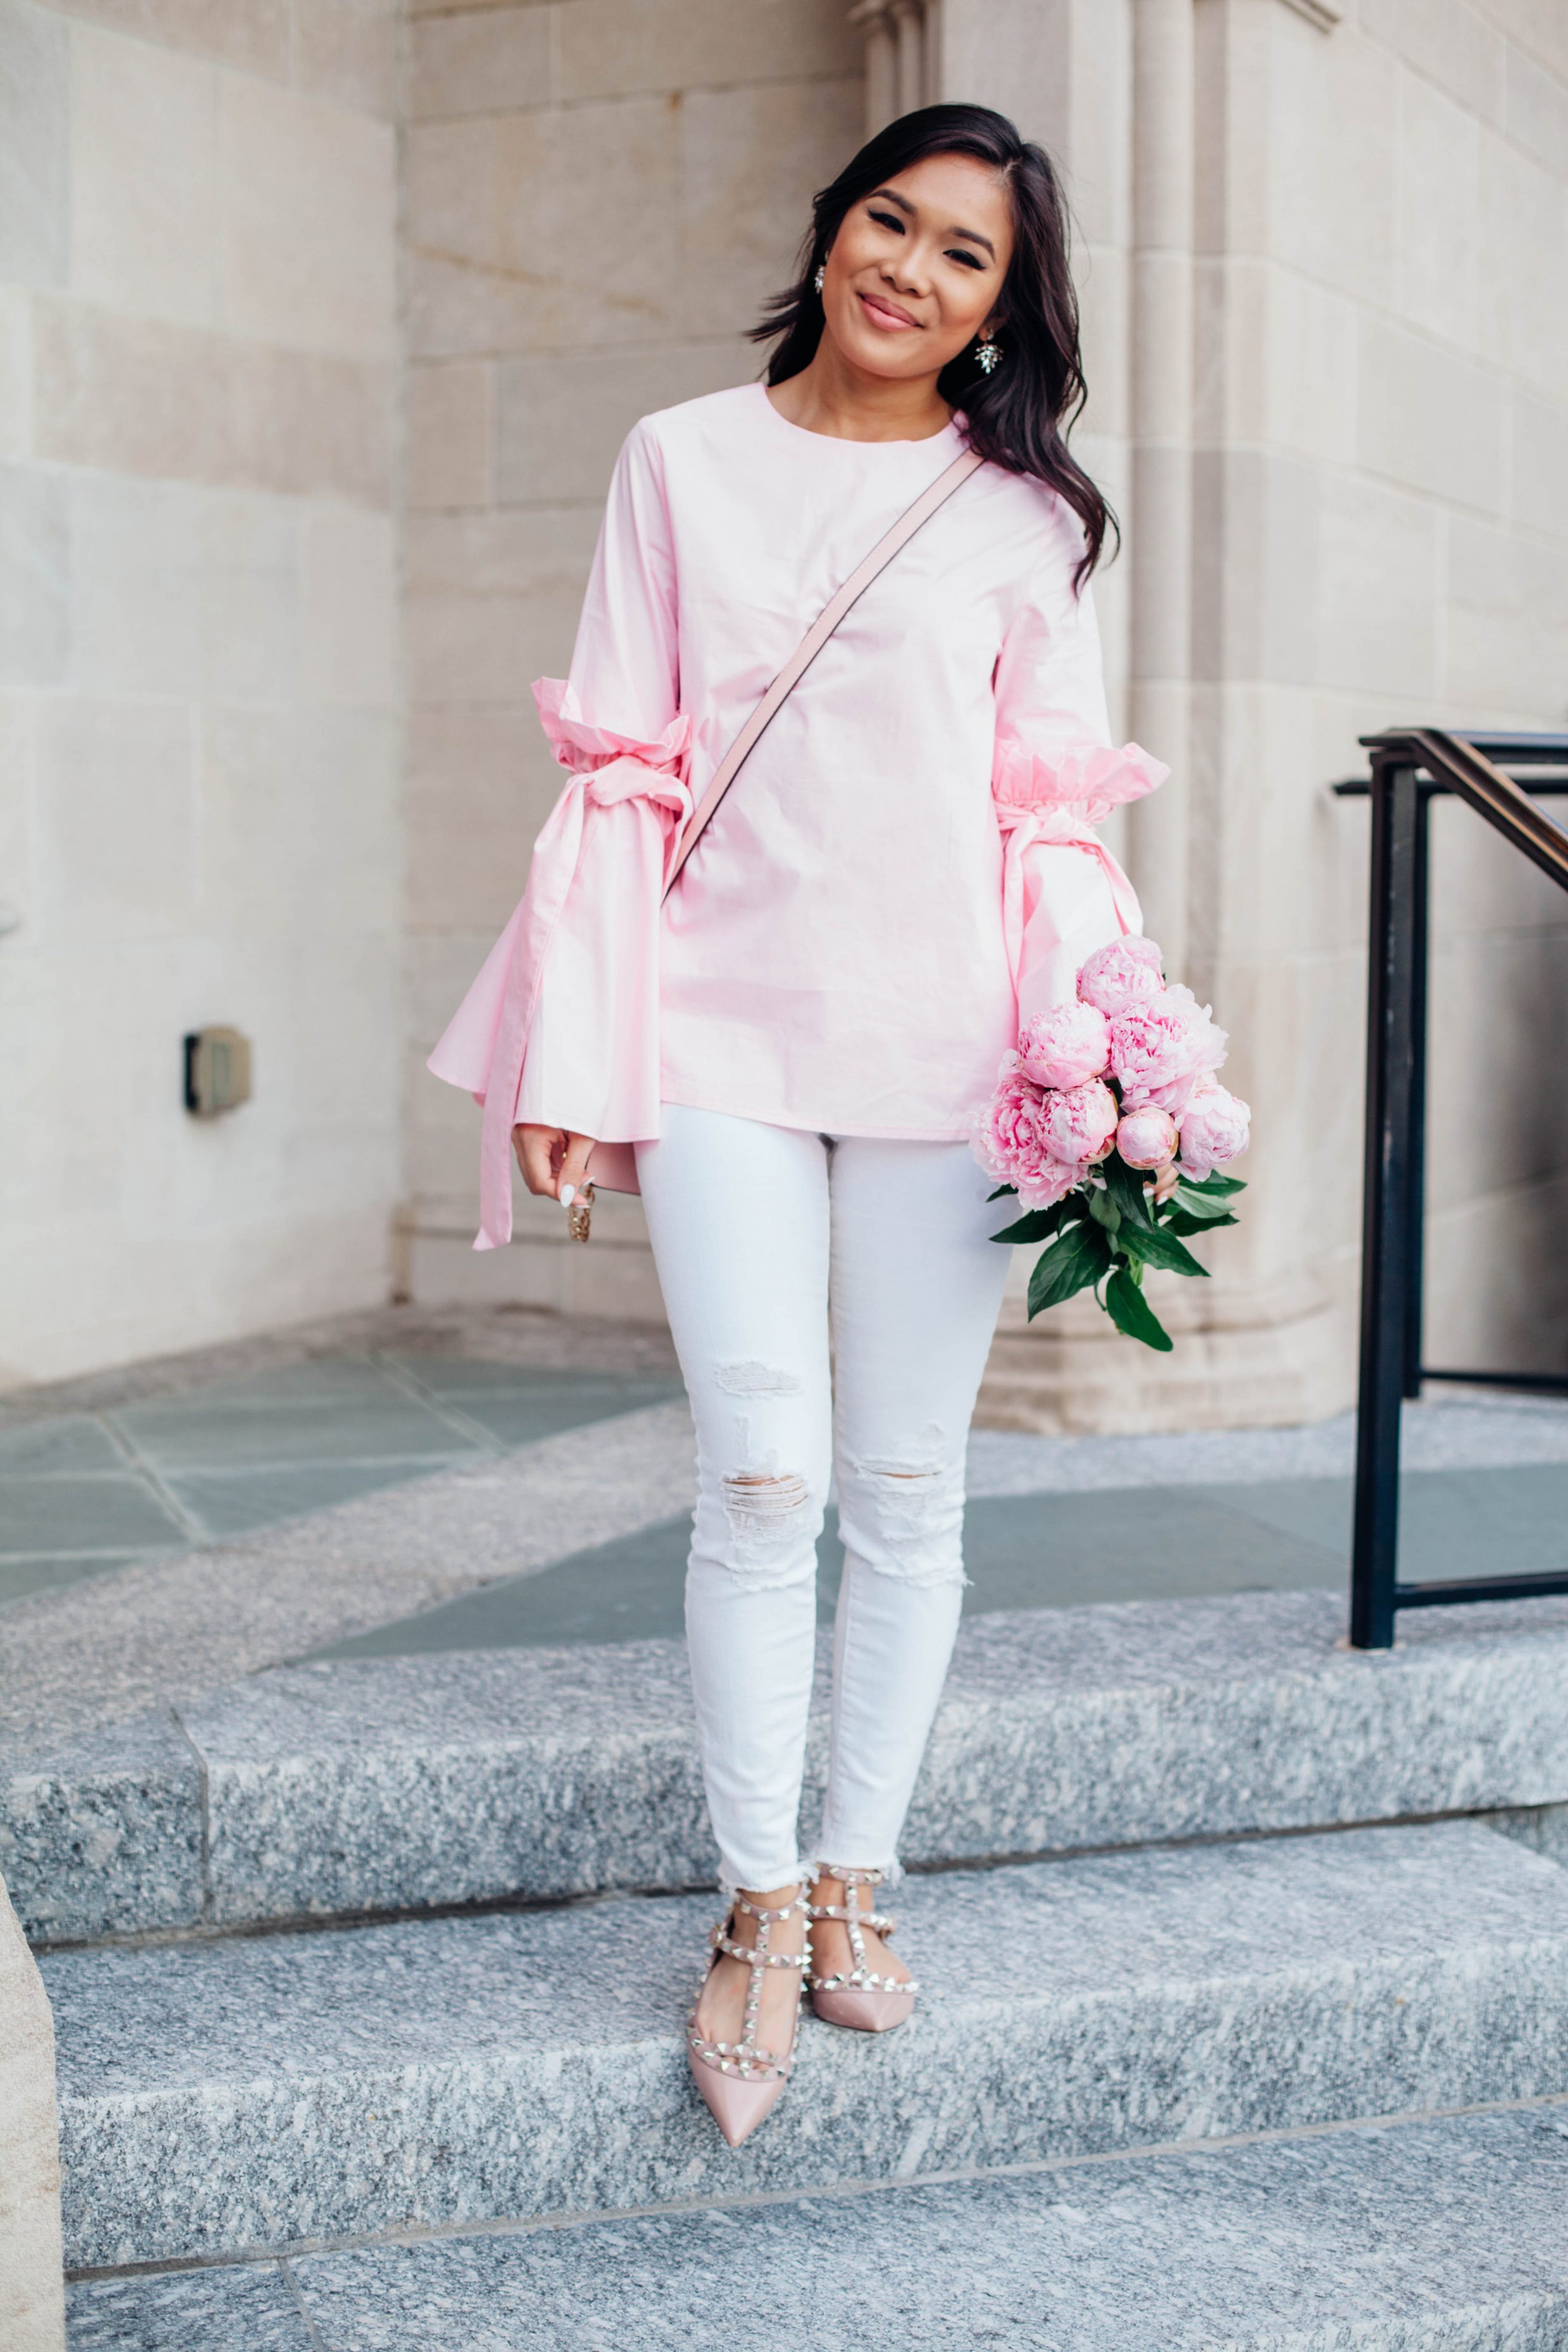 Pink Dramatic Bell Sleeve Top with Bows + Ruffles - Color & Chic